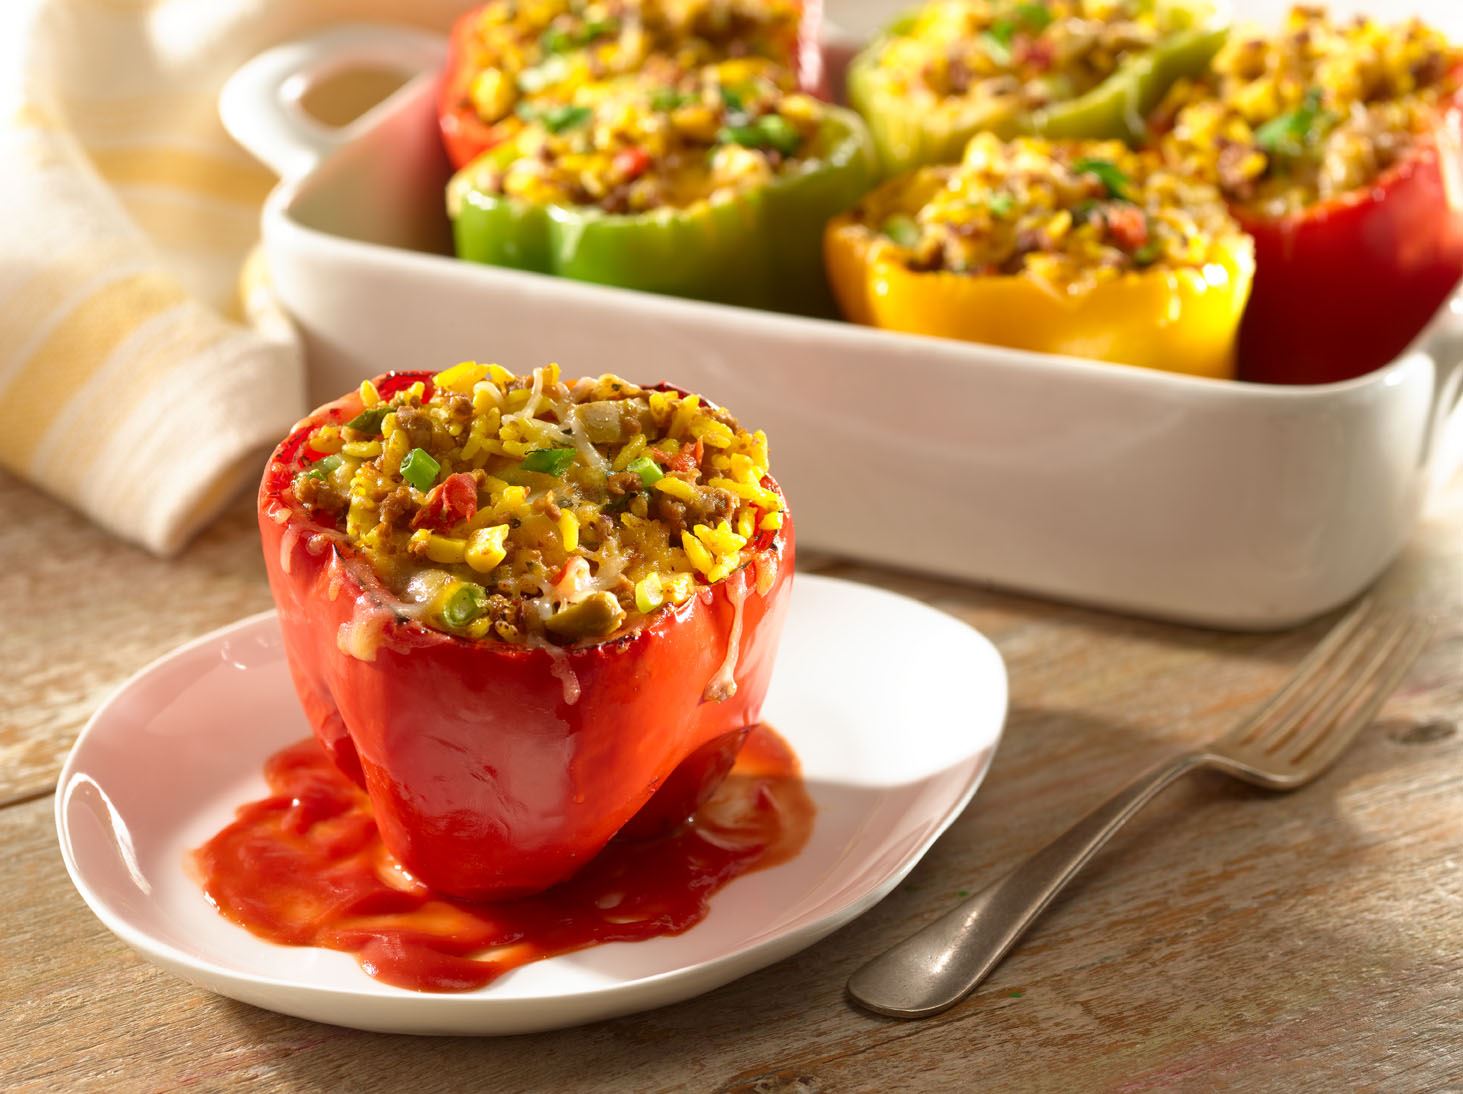 Meatless Stuffed Peppers with Corn and Olives